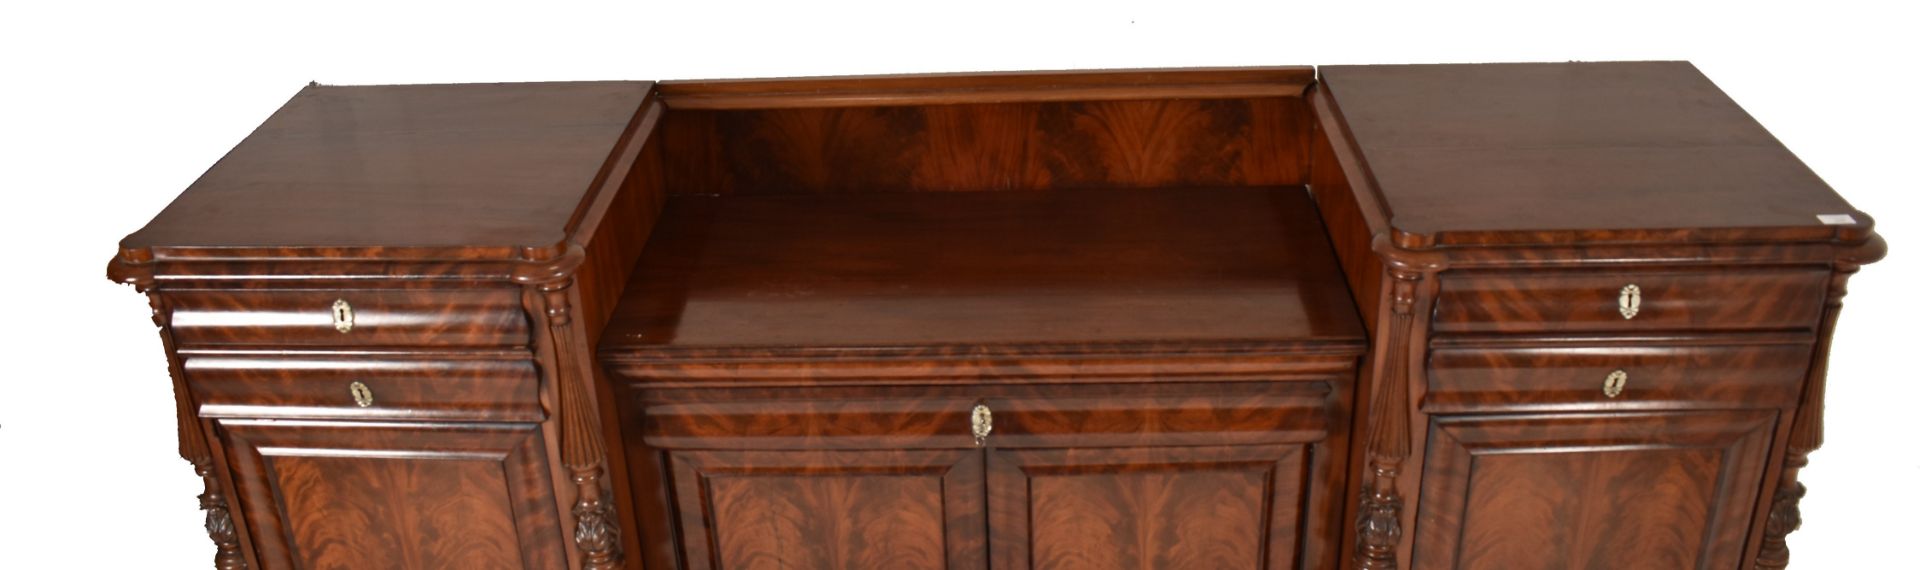 19TH CENTURY VICTORIAN INVERTED BREAKFRONT SIDEBOARD - Image 5 of 12